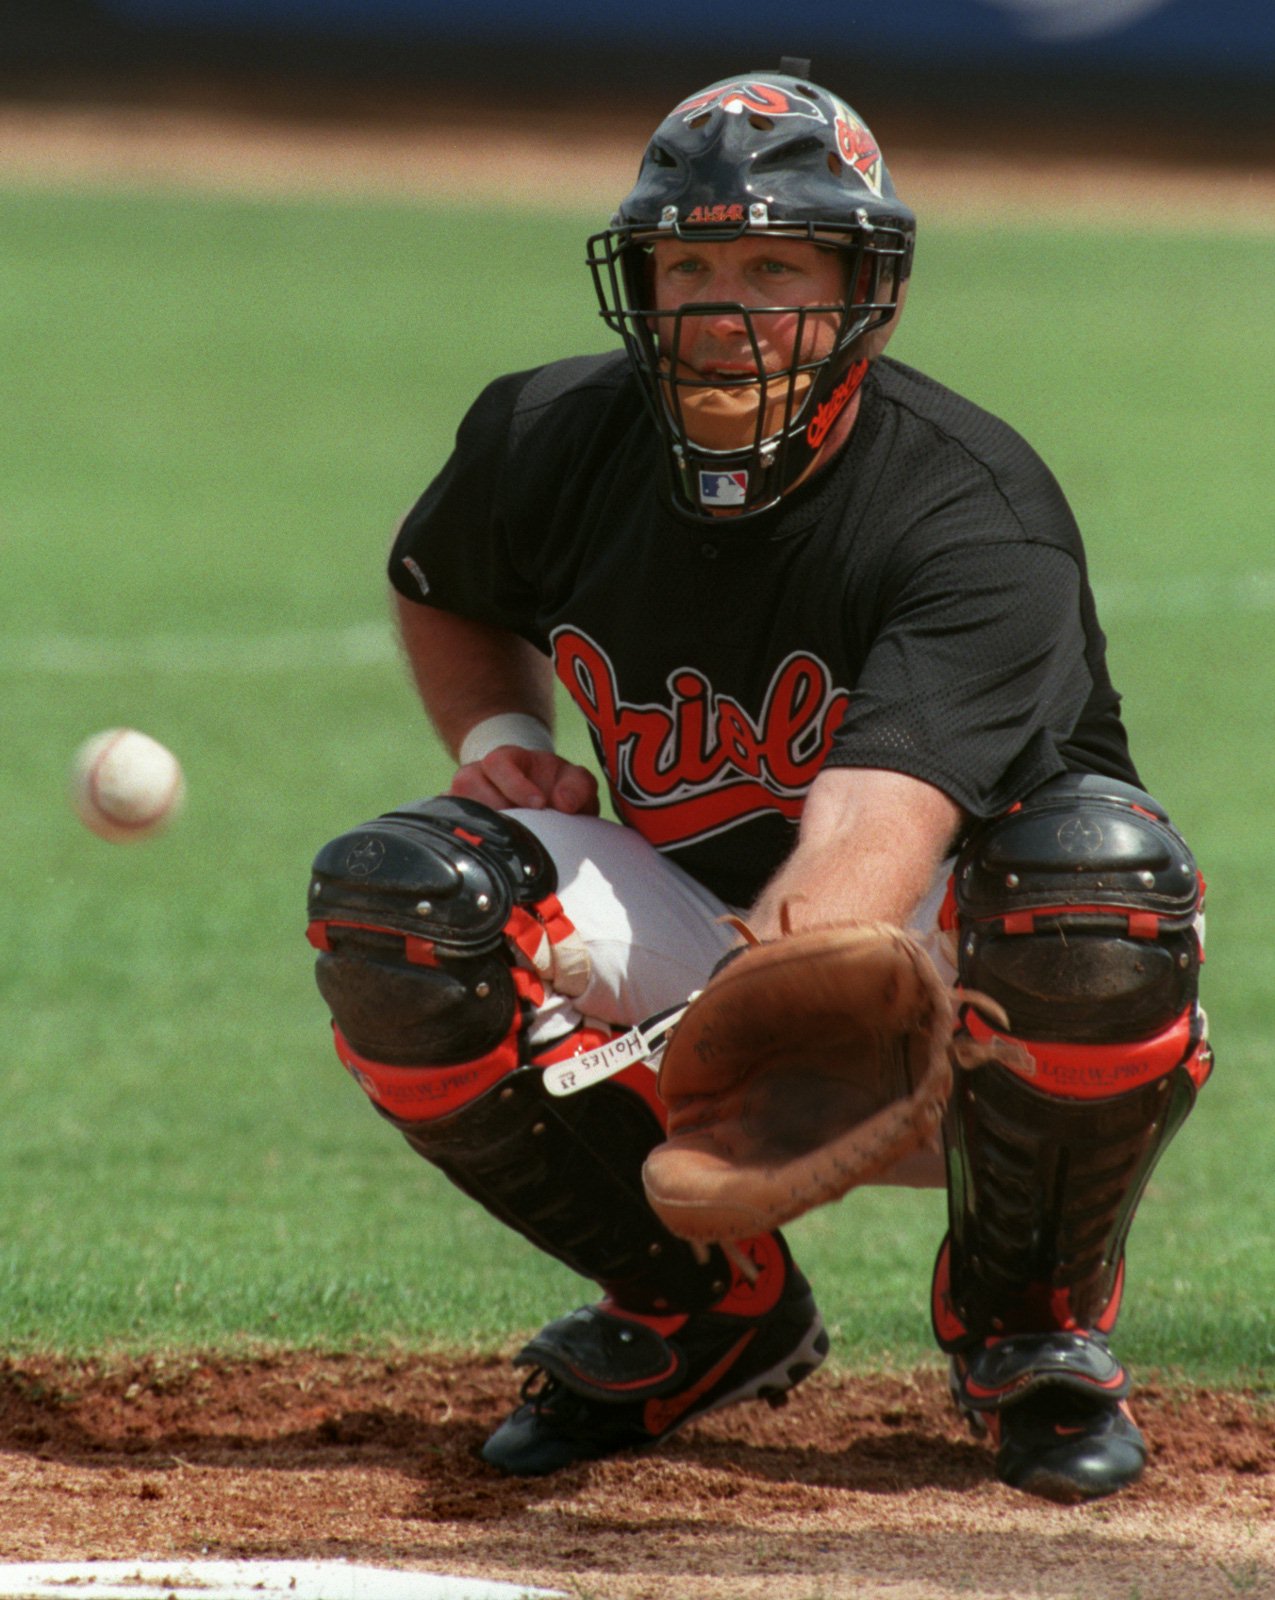 FT. LAUDERDALE, FLA--Mar 3, 1997--Orioles' catcher #23, Chris Hoiles, wearing a new catcher's mask. Photo by Kenneth K. Lam/staff